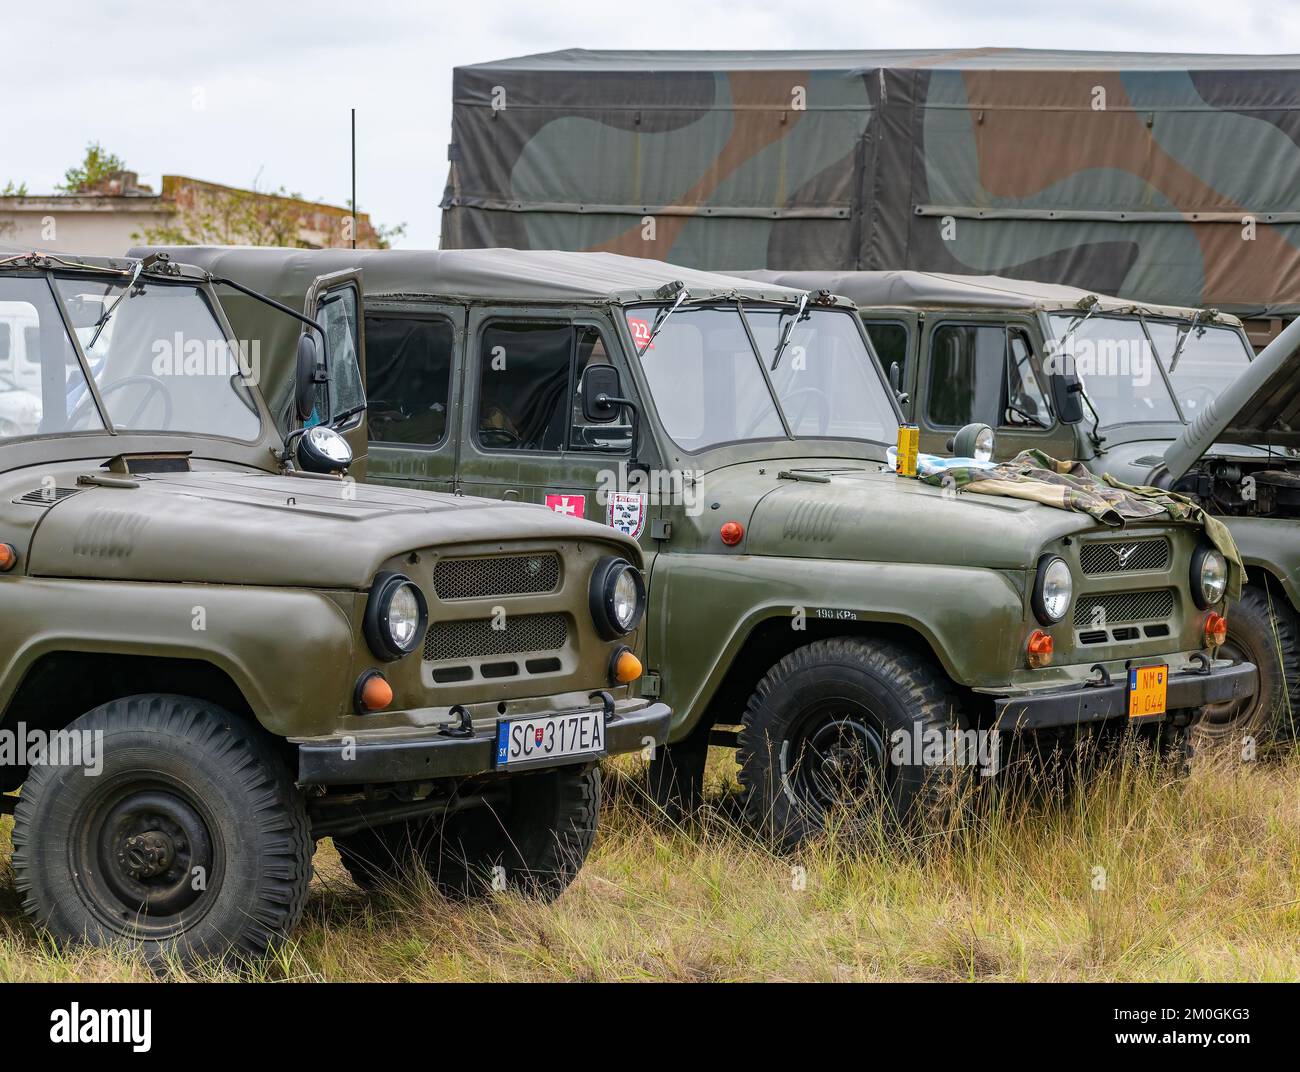 Military Day Hodonin - Panov. Historical and contemporary military equipment - military vehicle UAZ 469 Stock Photo